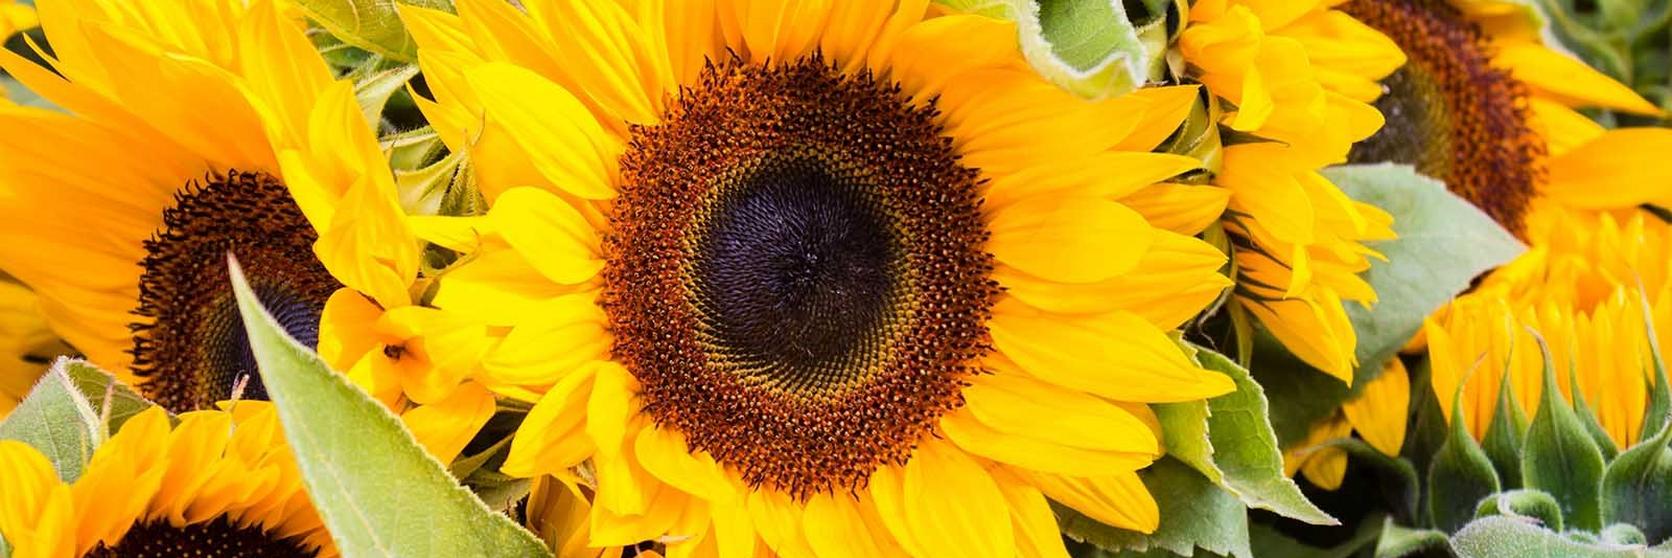 sunflower-facts-ultimate-flower-guide